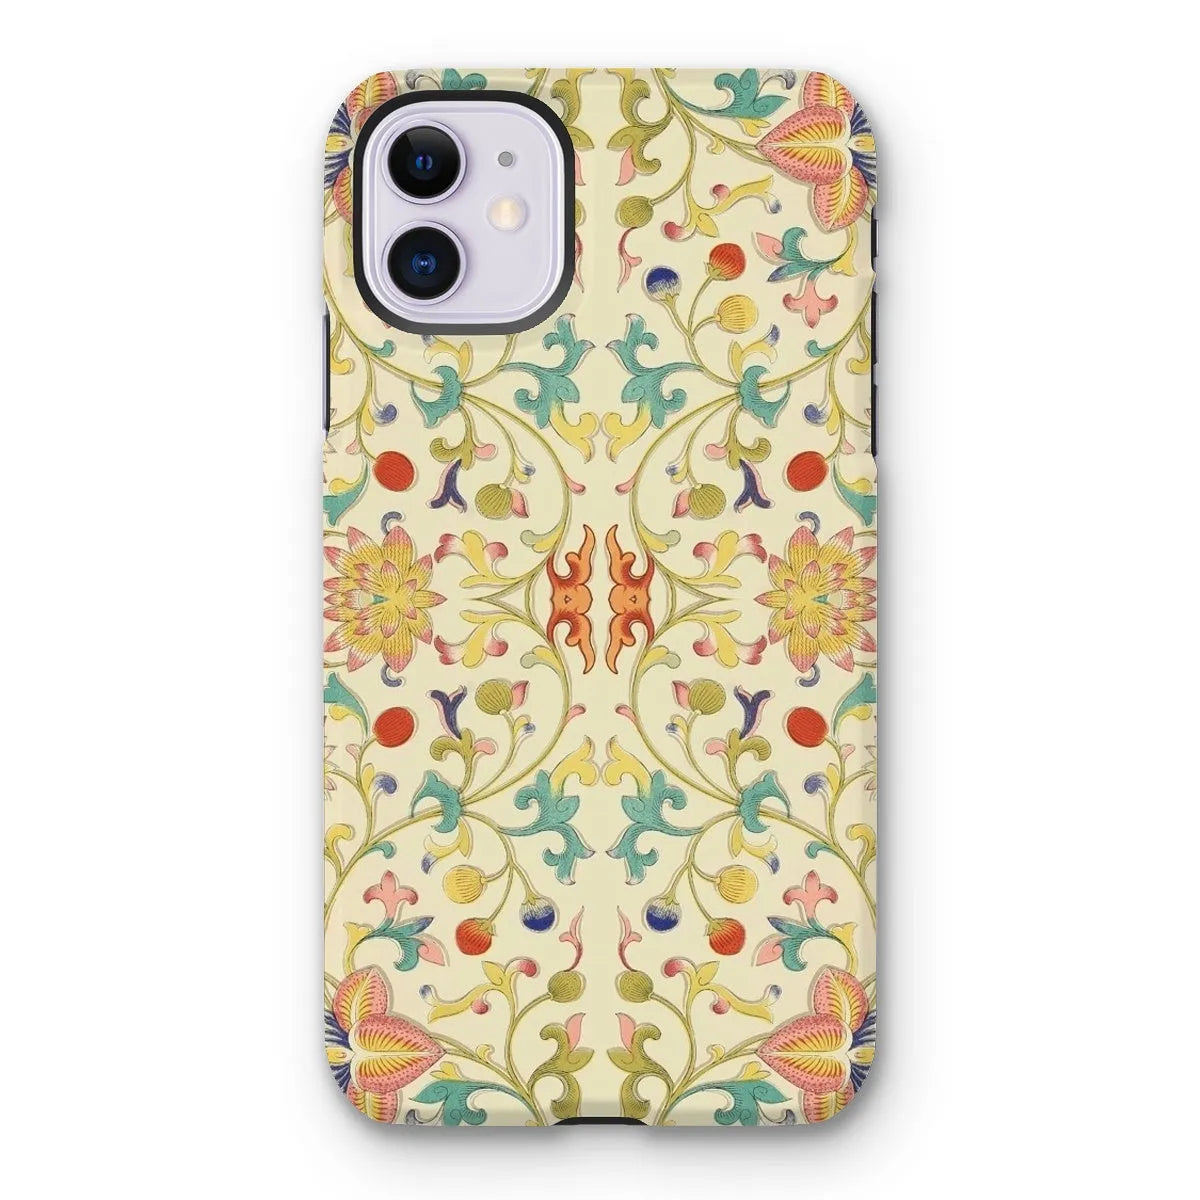 Over The Rainbow - Chinoiserie Pattern Art Phone Case - Iphone 11 / Matte - Mobile Phone Cases - Aesthetic Art